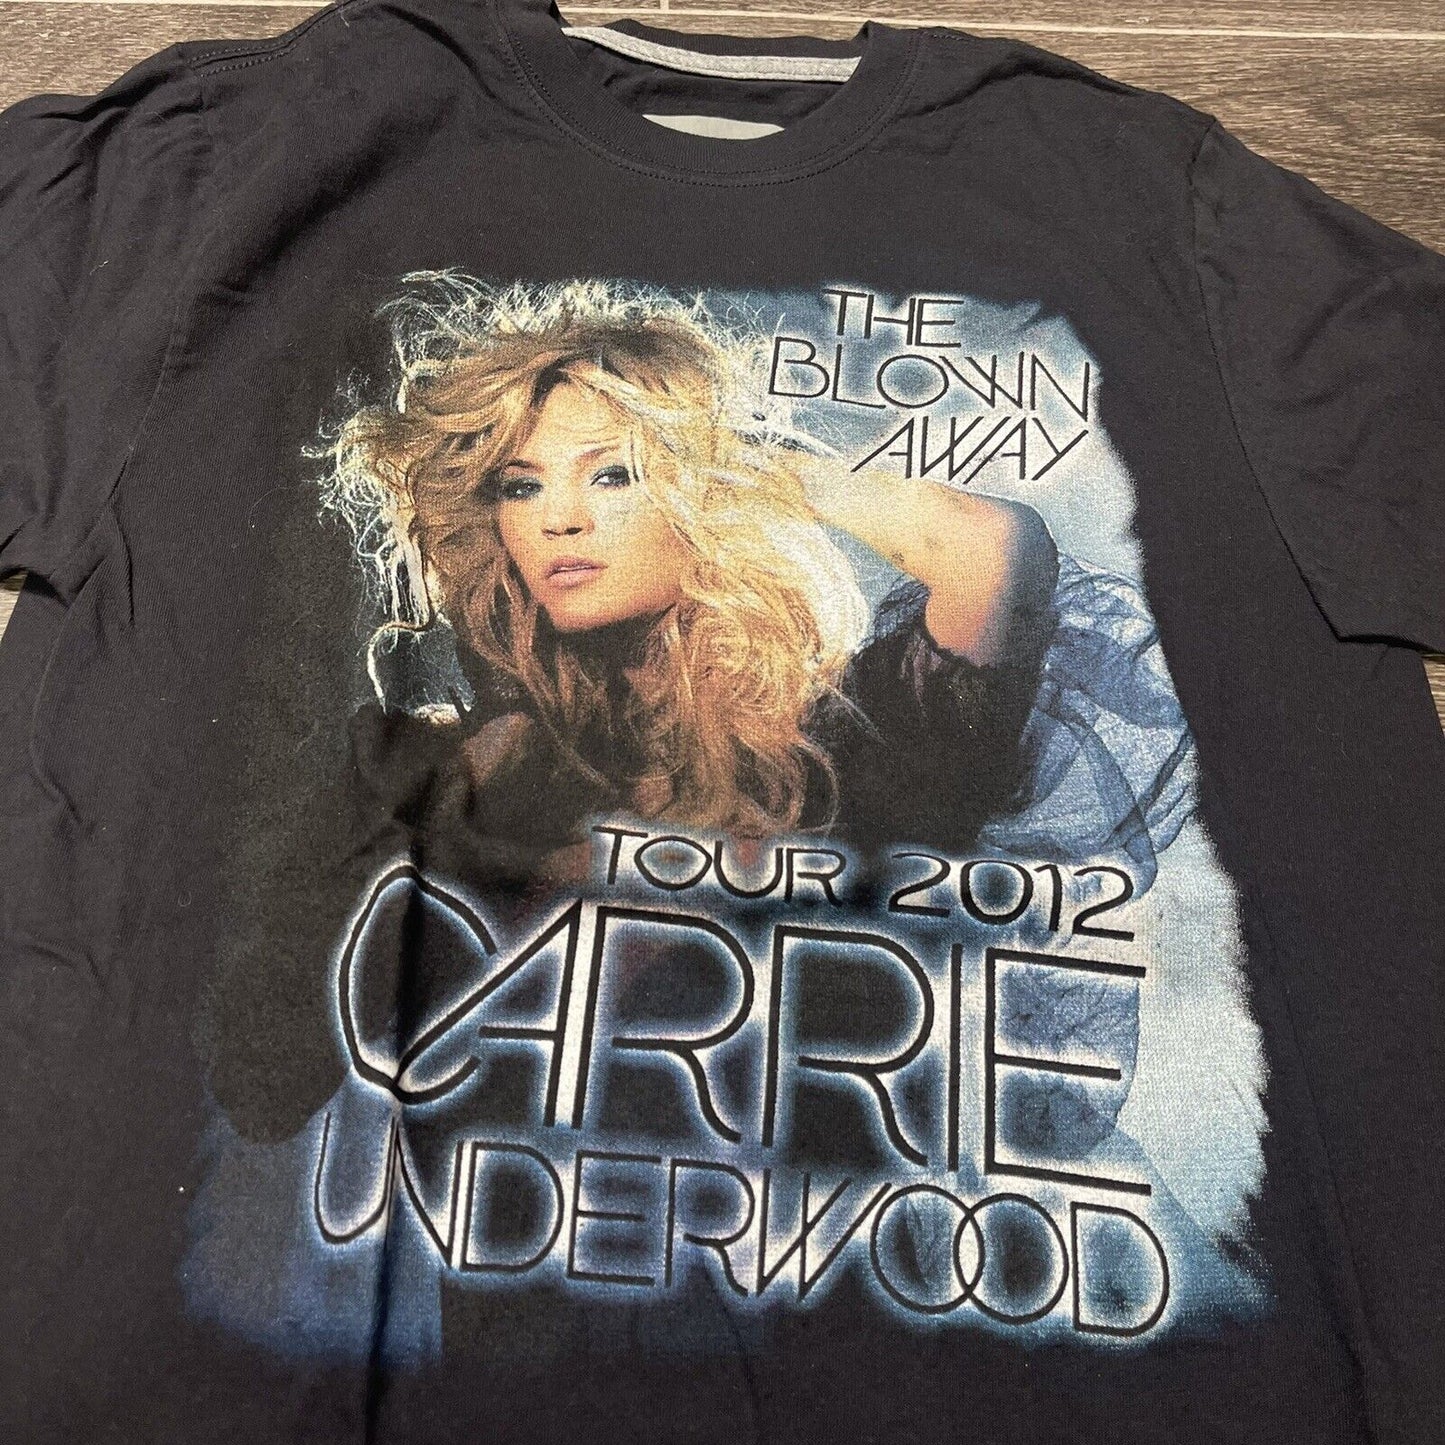 Carrie Underwood The Blown Away Tour 2012 T-shirt w/ Hunter Hayes Size Small